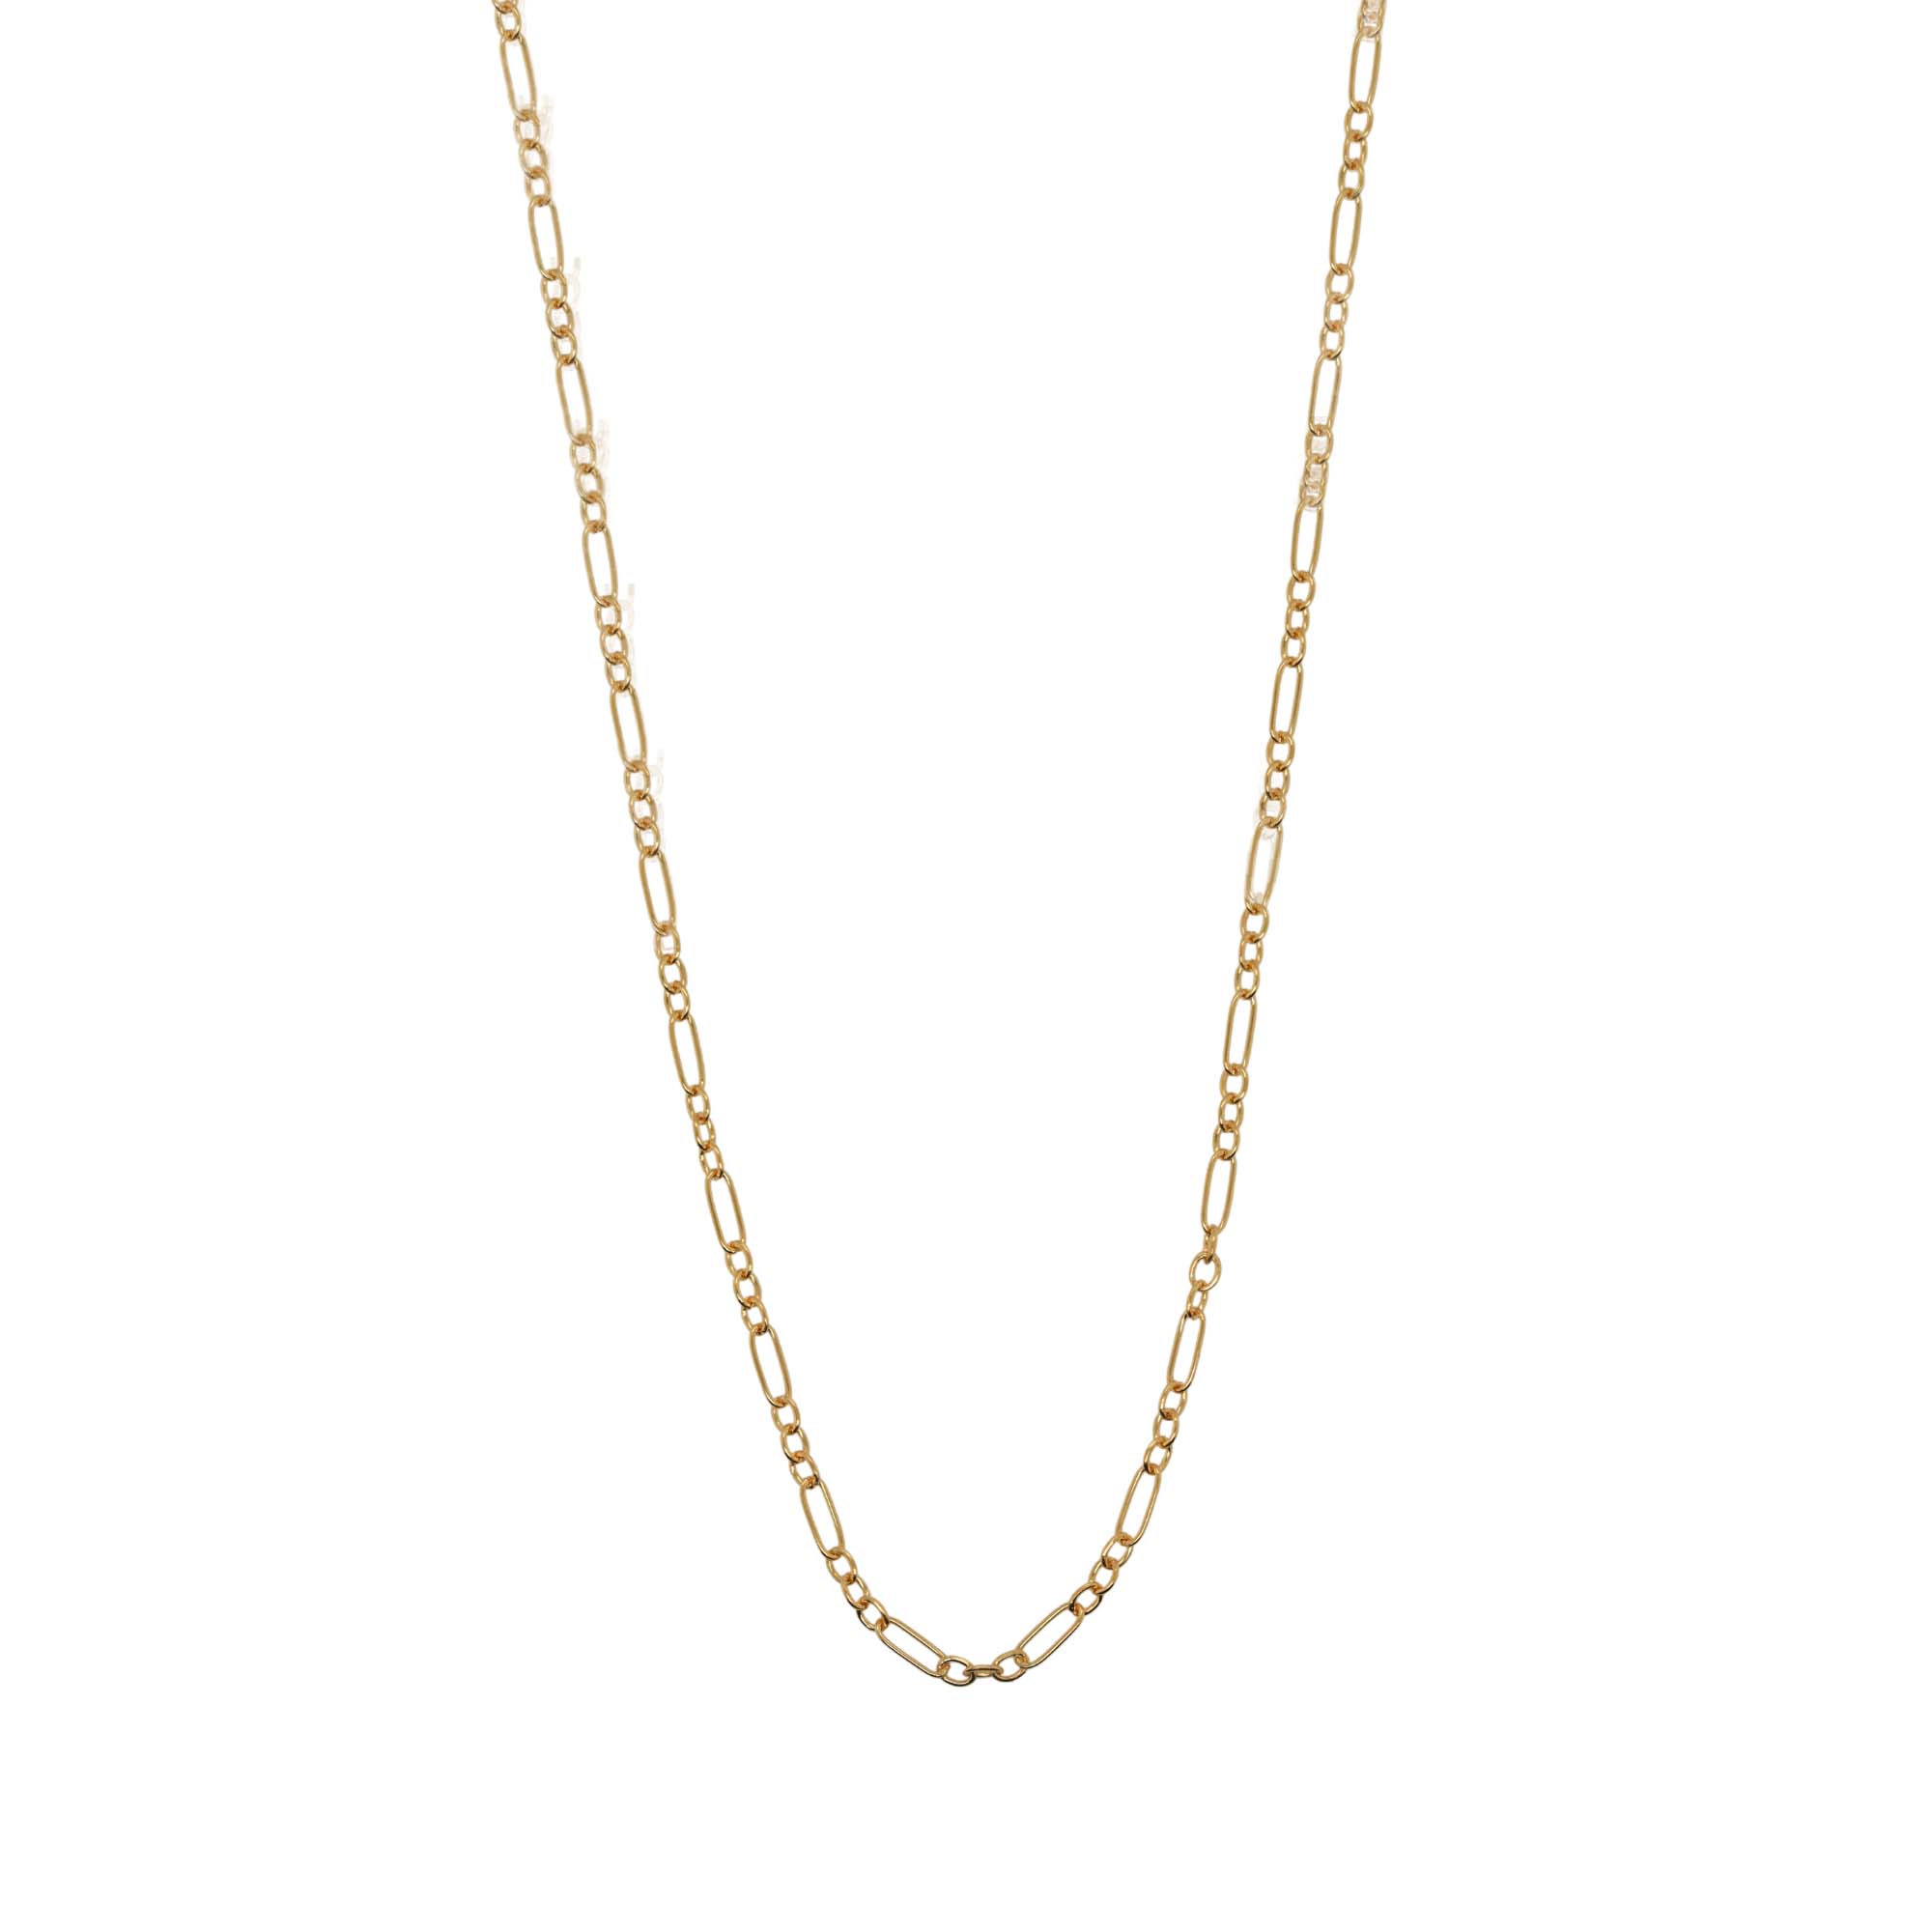 Goldfill 3 + 1 Elongated Oval Link Chain